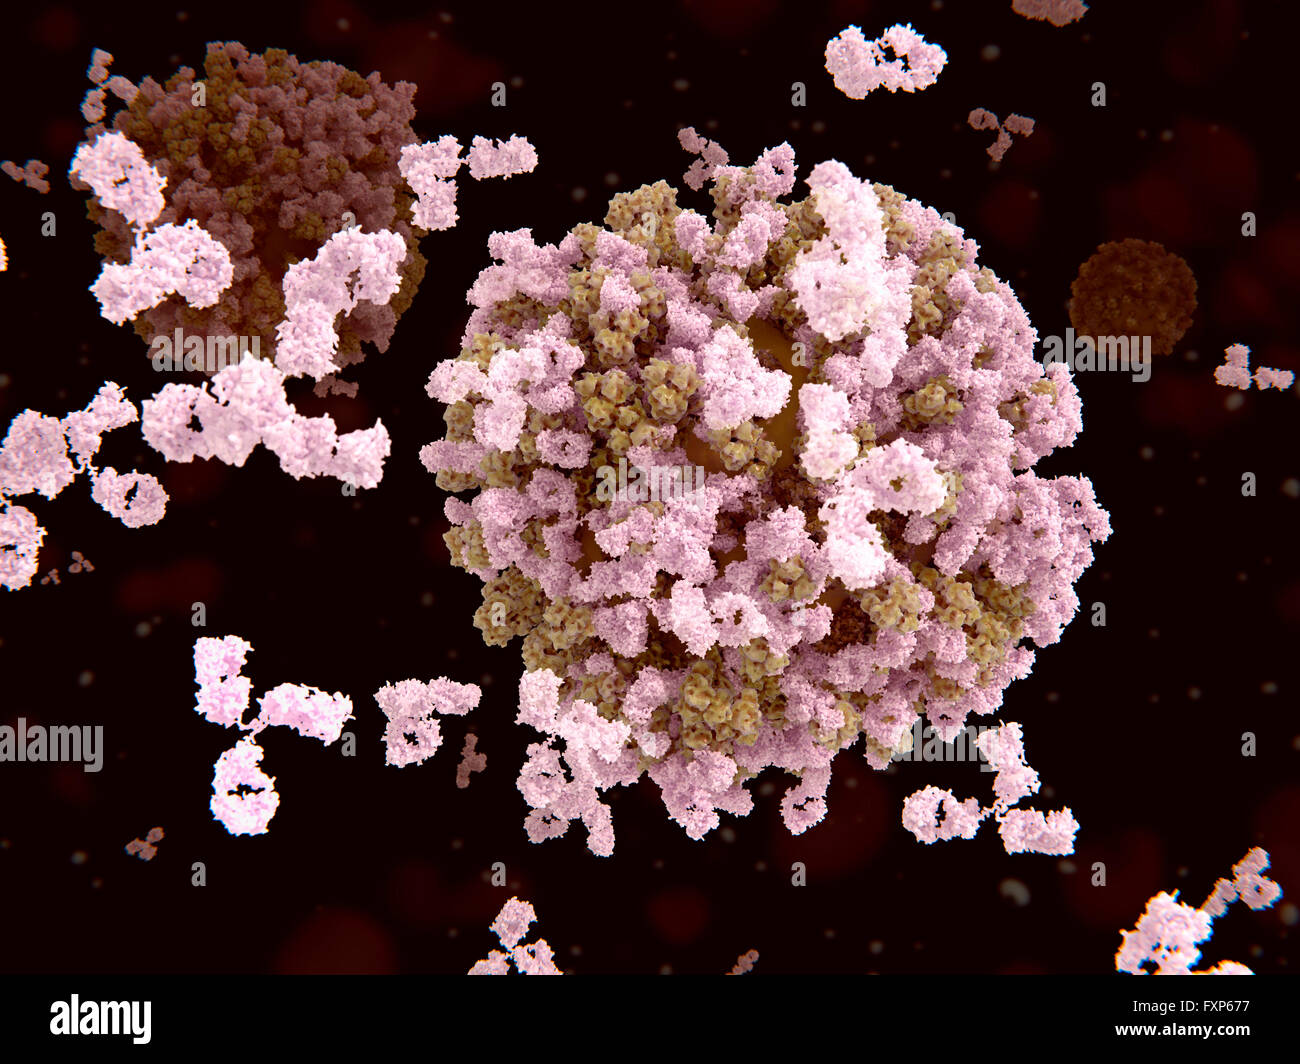 Antibodies and flu viruses. Illustration of antibodies (pink) attacking influenza virus particles (brown). The antibodies bind to the hemagglutinin protein, which contains the antigenic site of the virus. This binding by the antibodies prevents the virus particles from binding to the surface of human cells. Influenza is in the orthomyxovirus group of viruses. It infects the respiratory tract and causes fever, aching muscles, a sore throat and feelings of fatigue. New strains of the virus develop rapidly, and can cause epidemics. Stock Photo